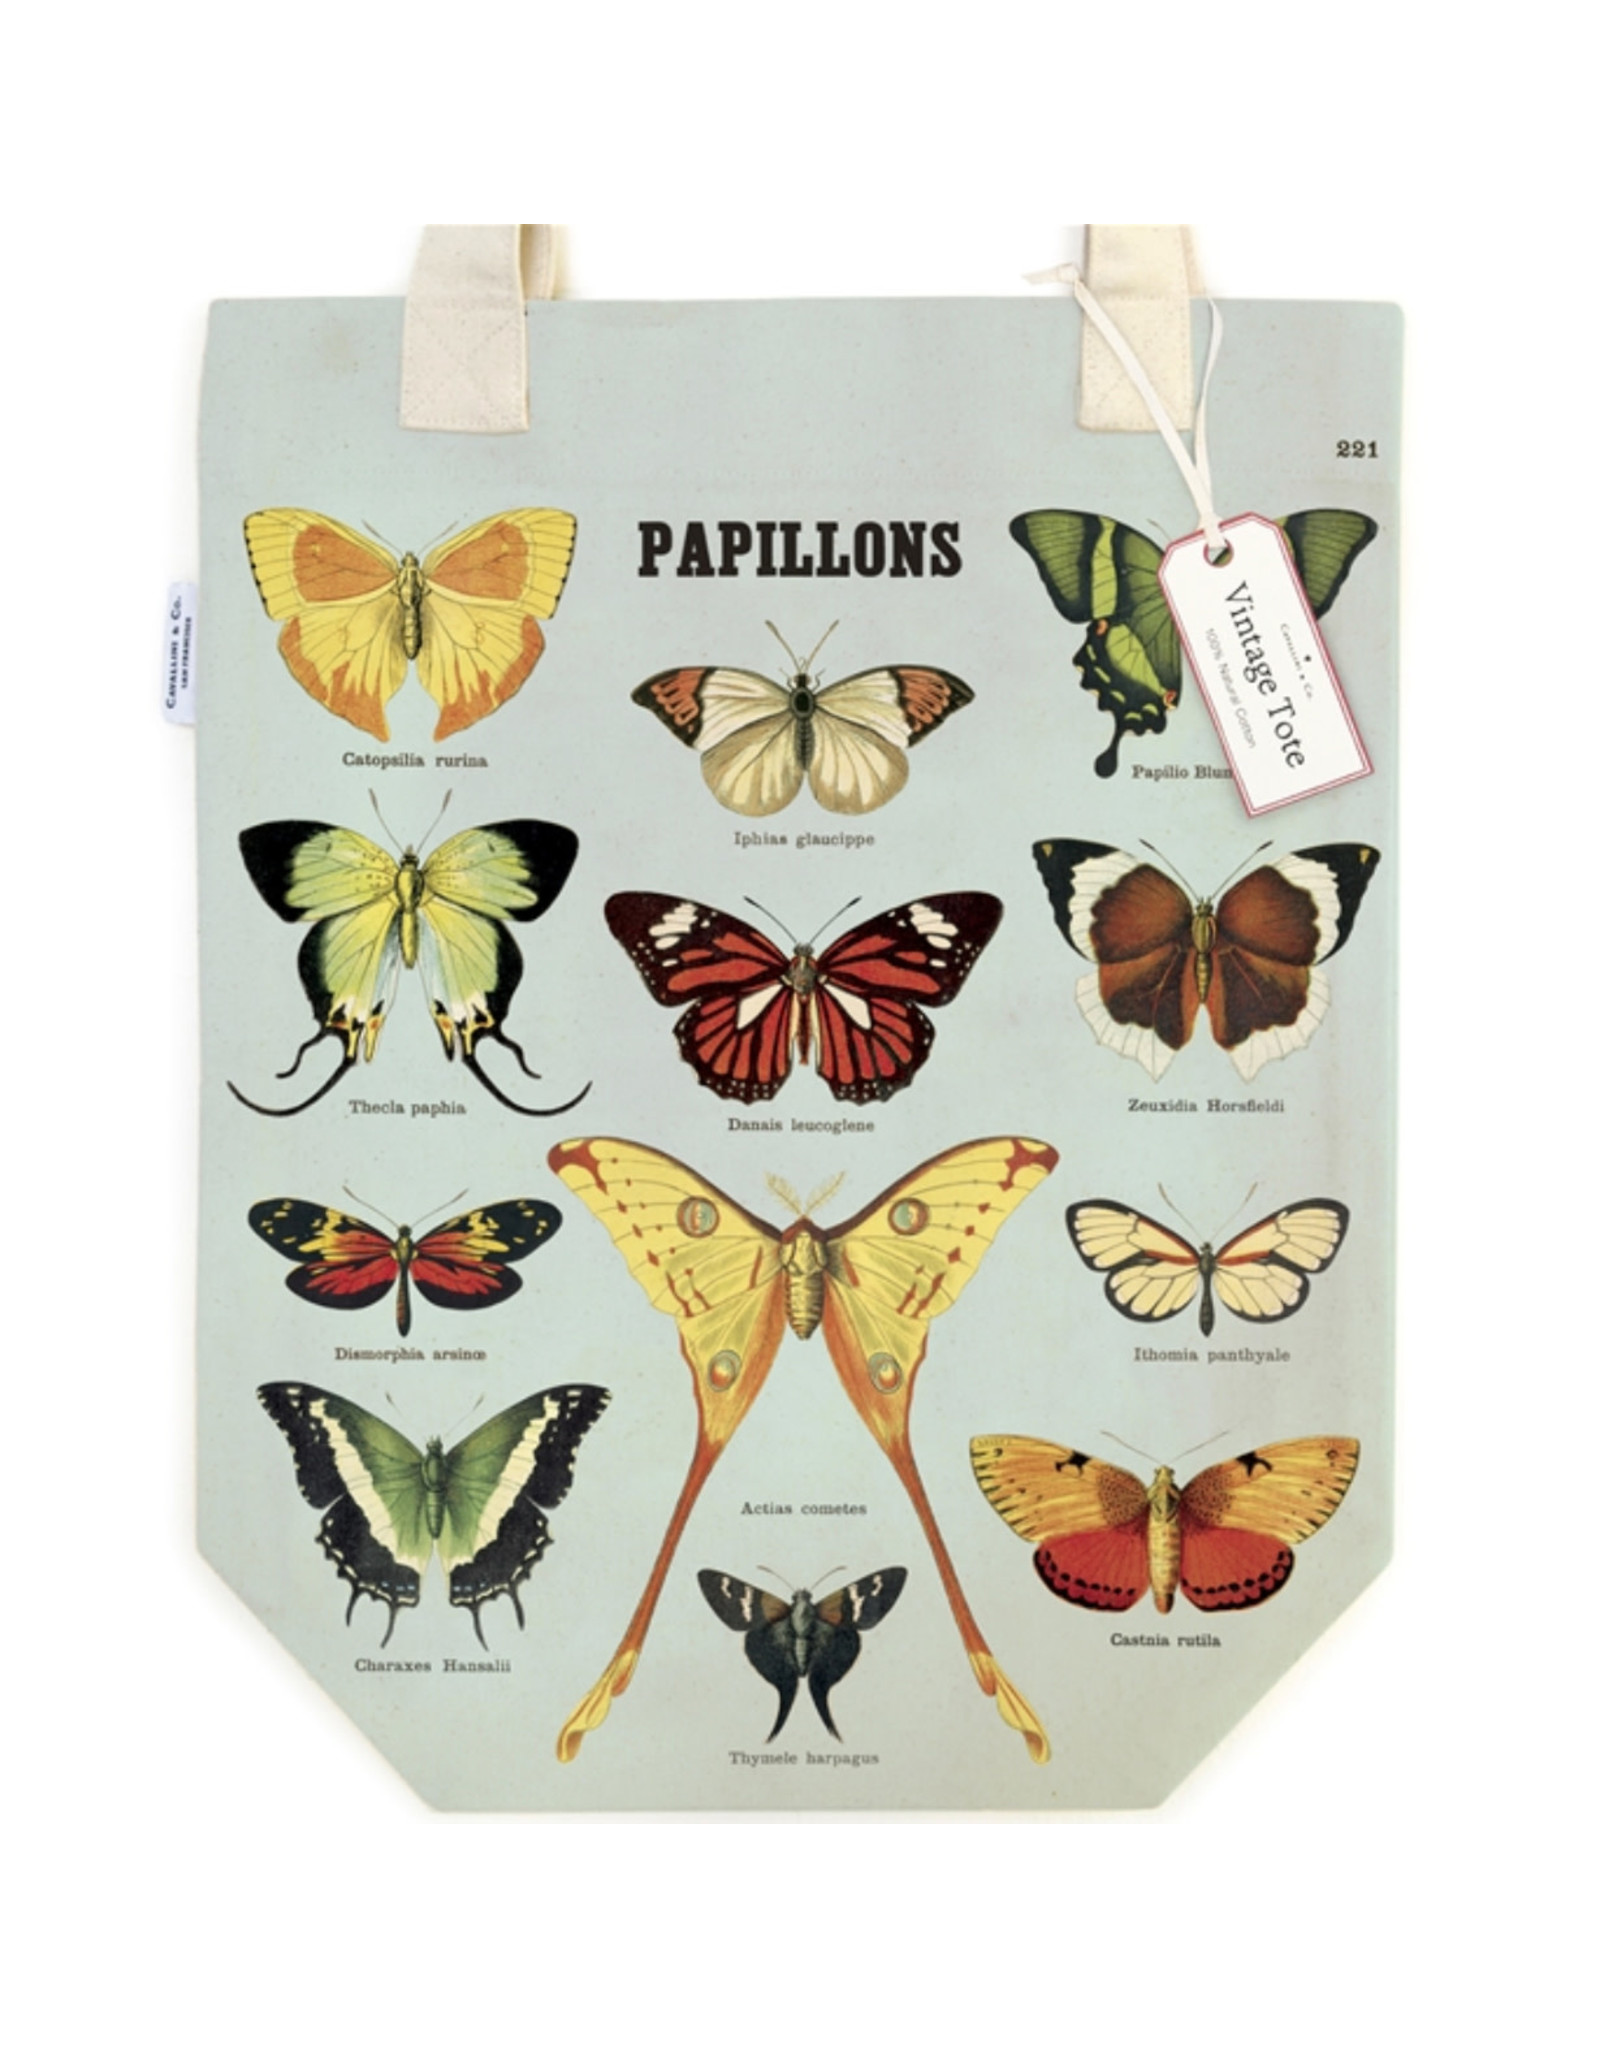 Cavallini Papers & Co. Butterflies Tote Bag